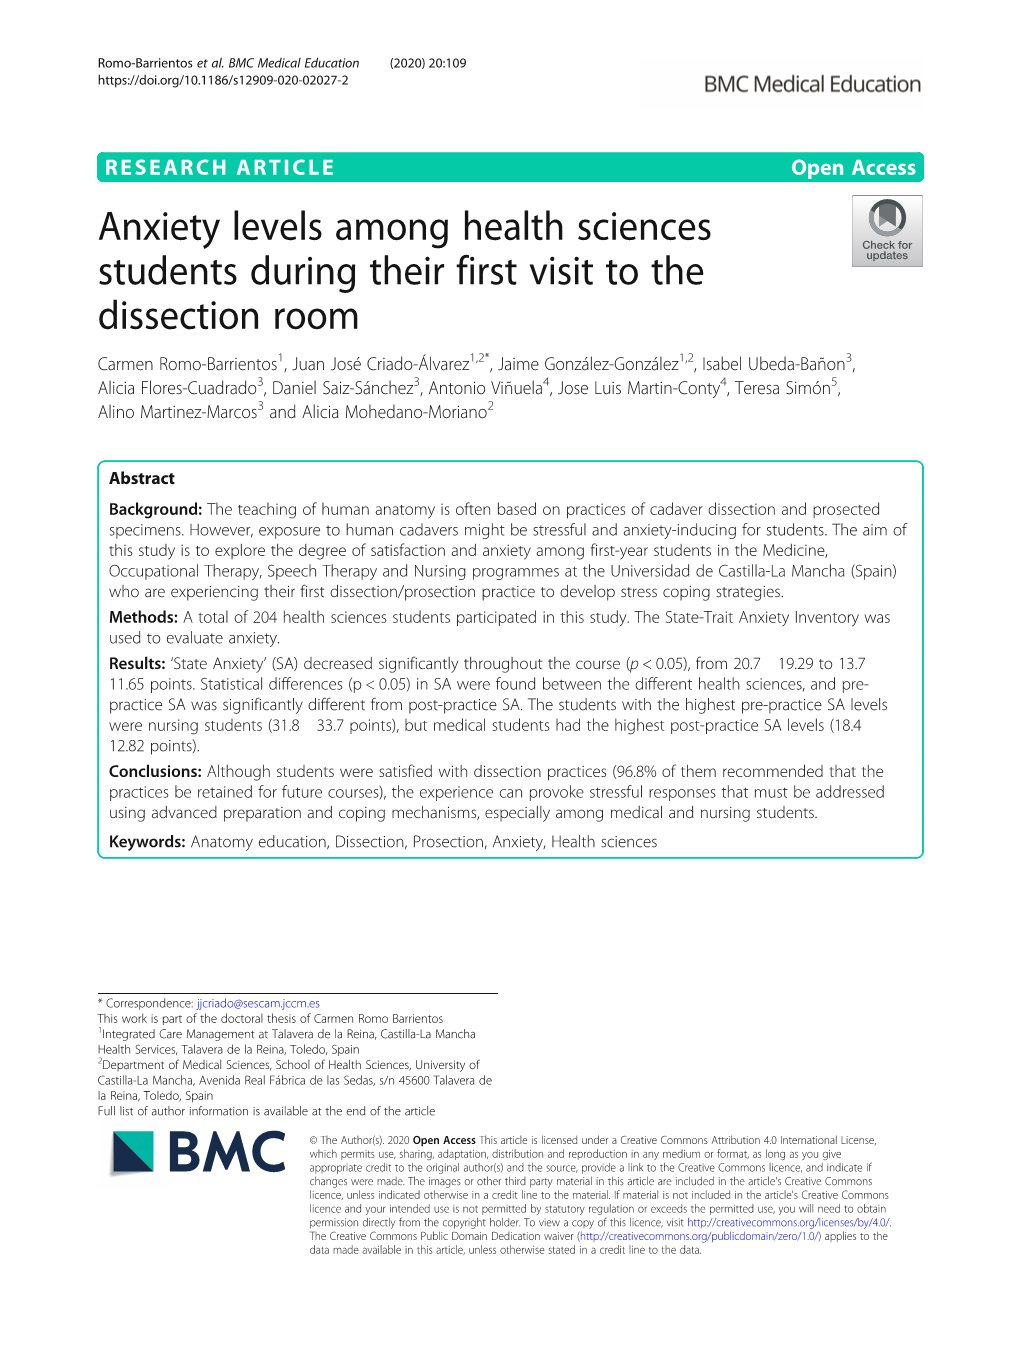 Anxiety Levels Among Health Sciences Students During Their First Visit to The